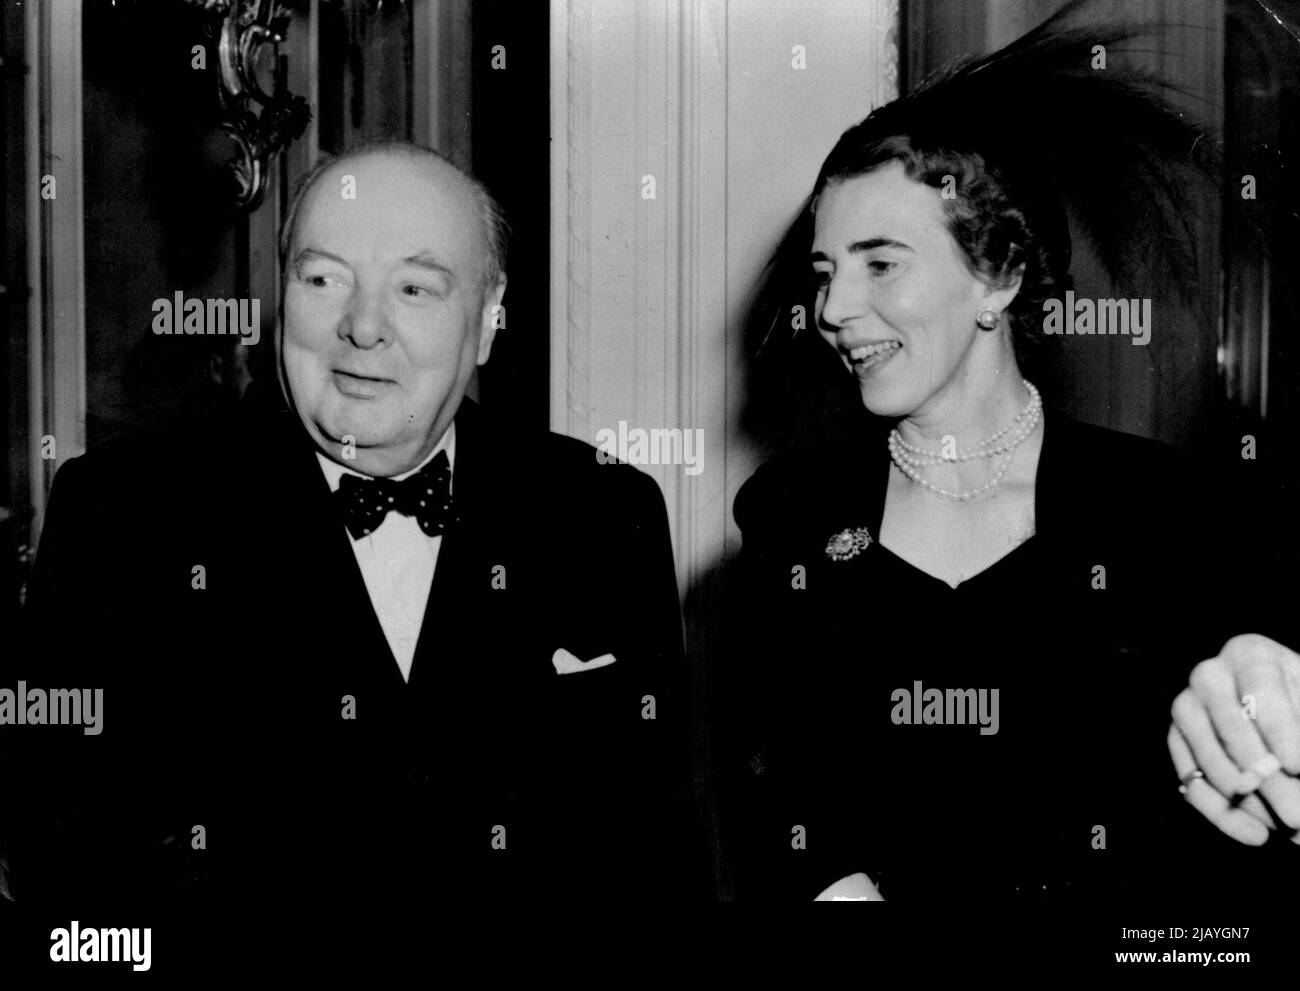 Winston's Birthday Smile : Mr. Winston Churchill's 75th birthday smile when he was ***** pictured at the luncheon with Queen Ingrid of Denmark. Mr. Winston Churchill, who is celebrating his 75th birthday, was guest of honor at a luncheon given at the Danish Embassy, Pont street, London, to-day (Wednesday). The King and Queen of Denmark, at present visiting England, and Mr. Clement Attlee, British Premier, were present. November 30, 1949. (Photo by Reuterphoto). Stock Photo